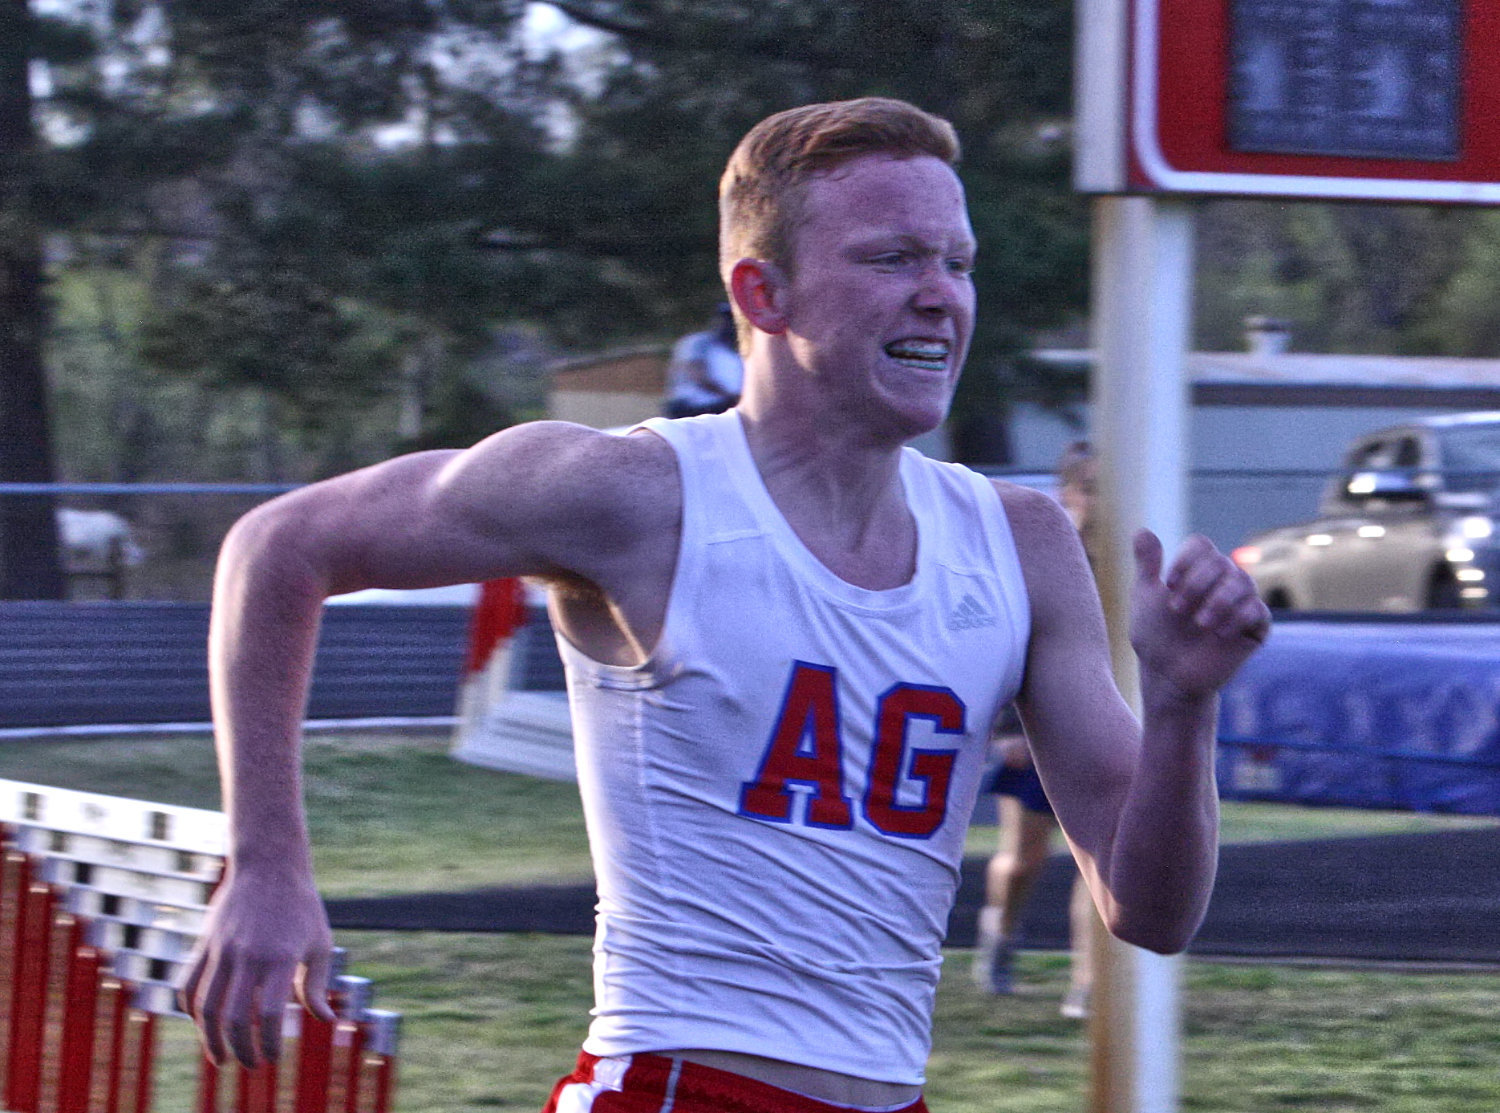 Alba-Golden’s Michael Gaskill displays the face of determination in the home stretch while competing in the Ferrell Wright Relays.